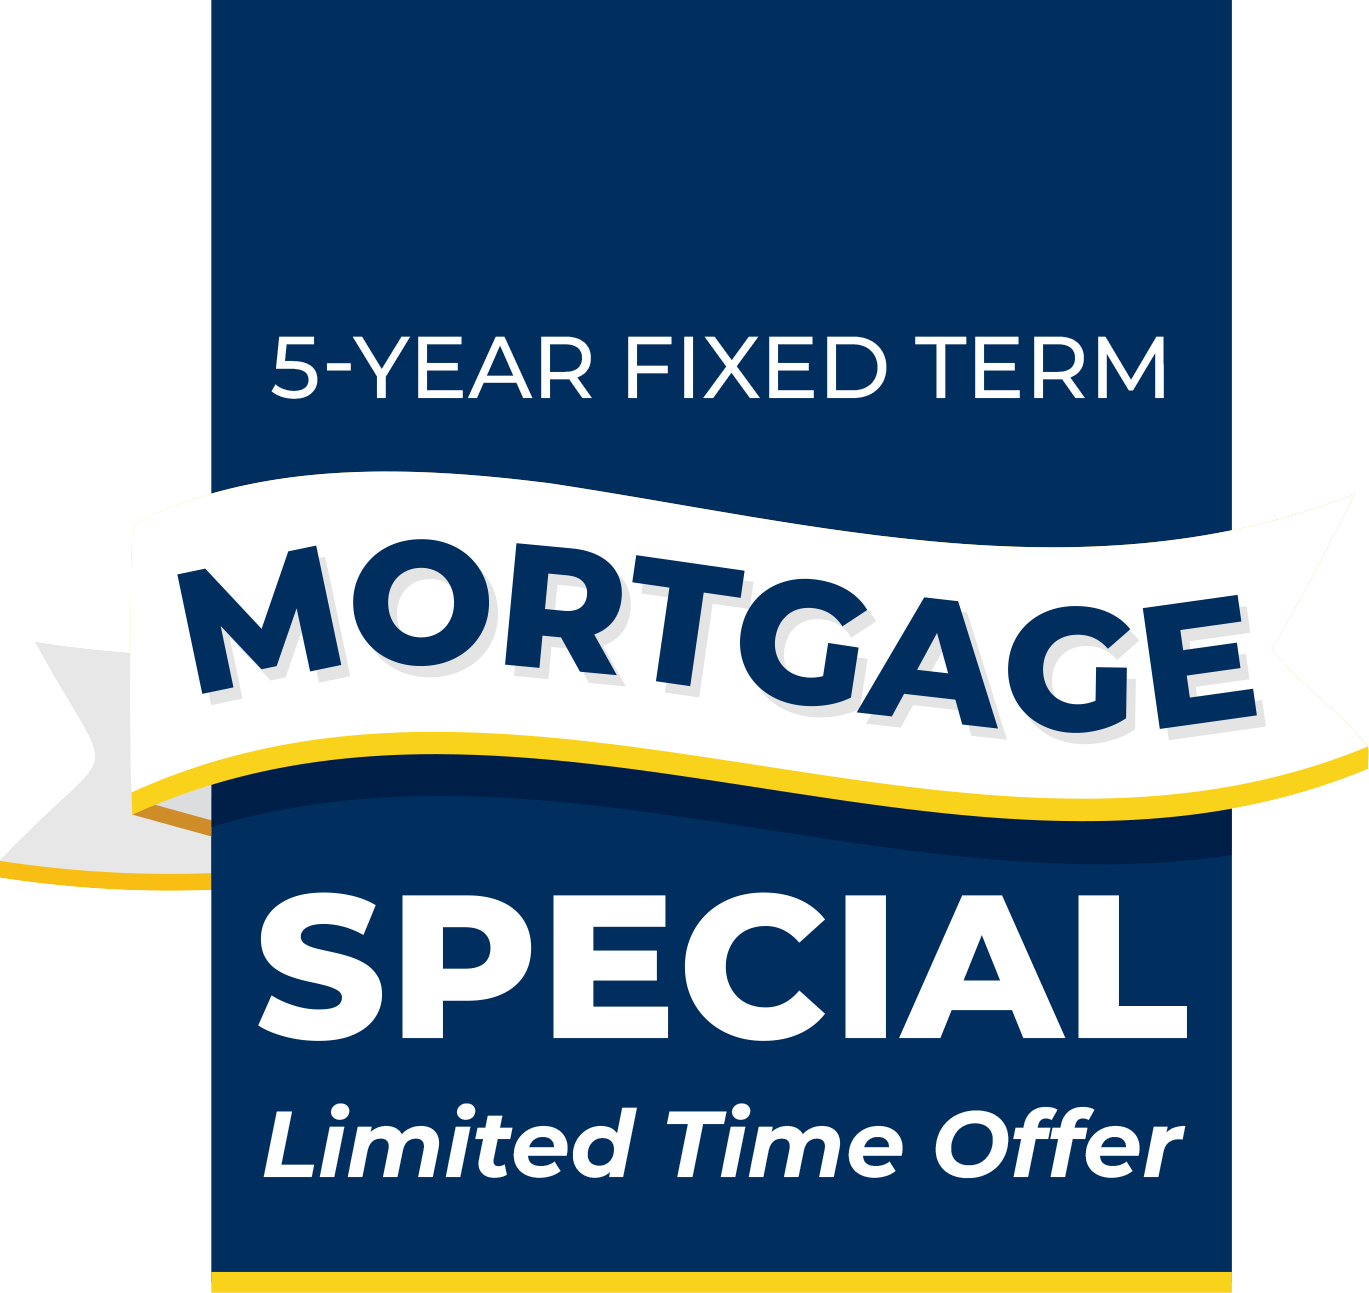 5.40% RRSP Specials Available Now!